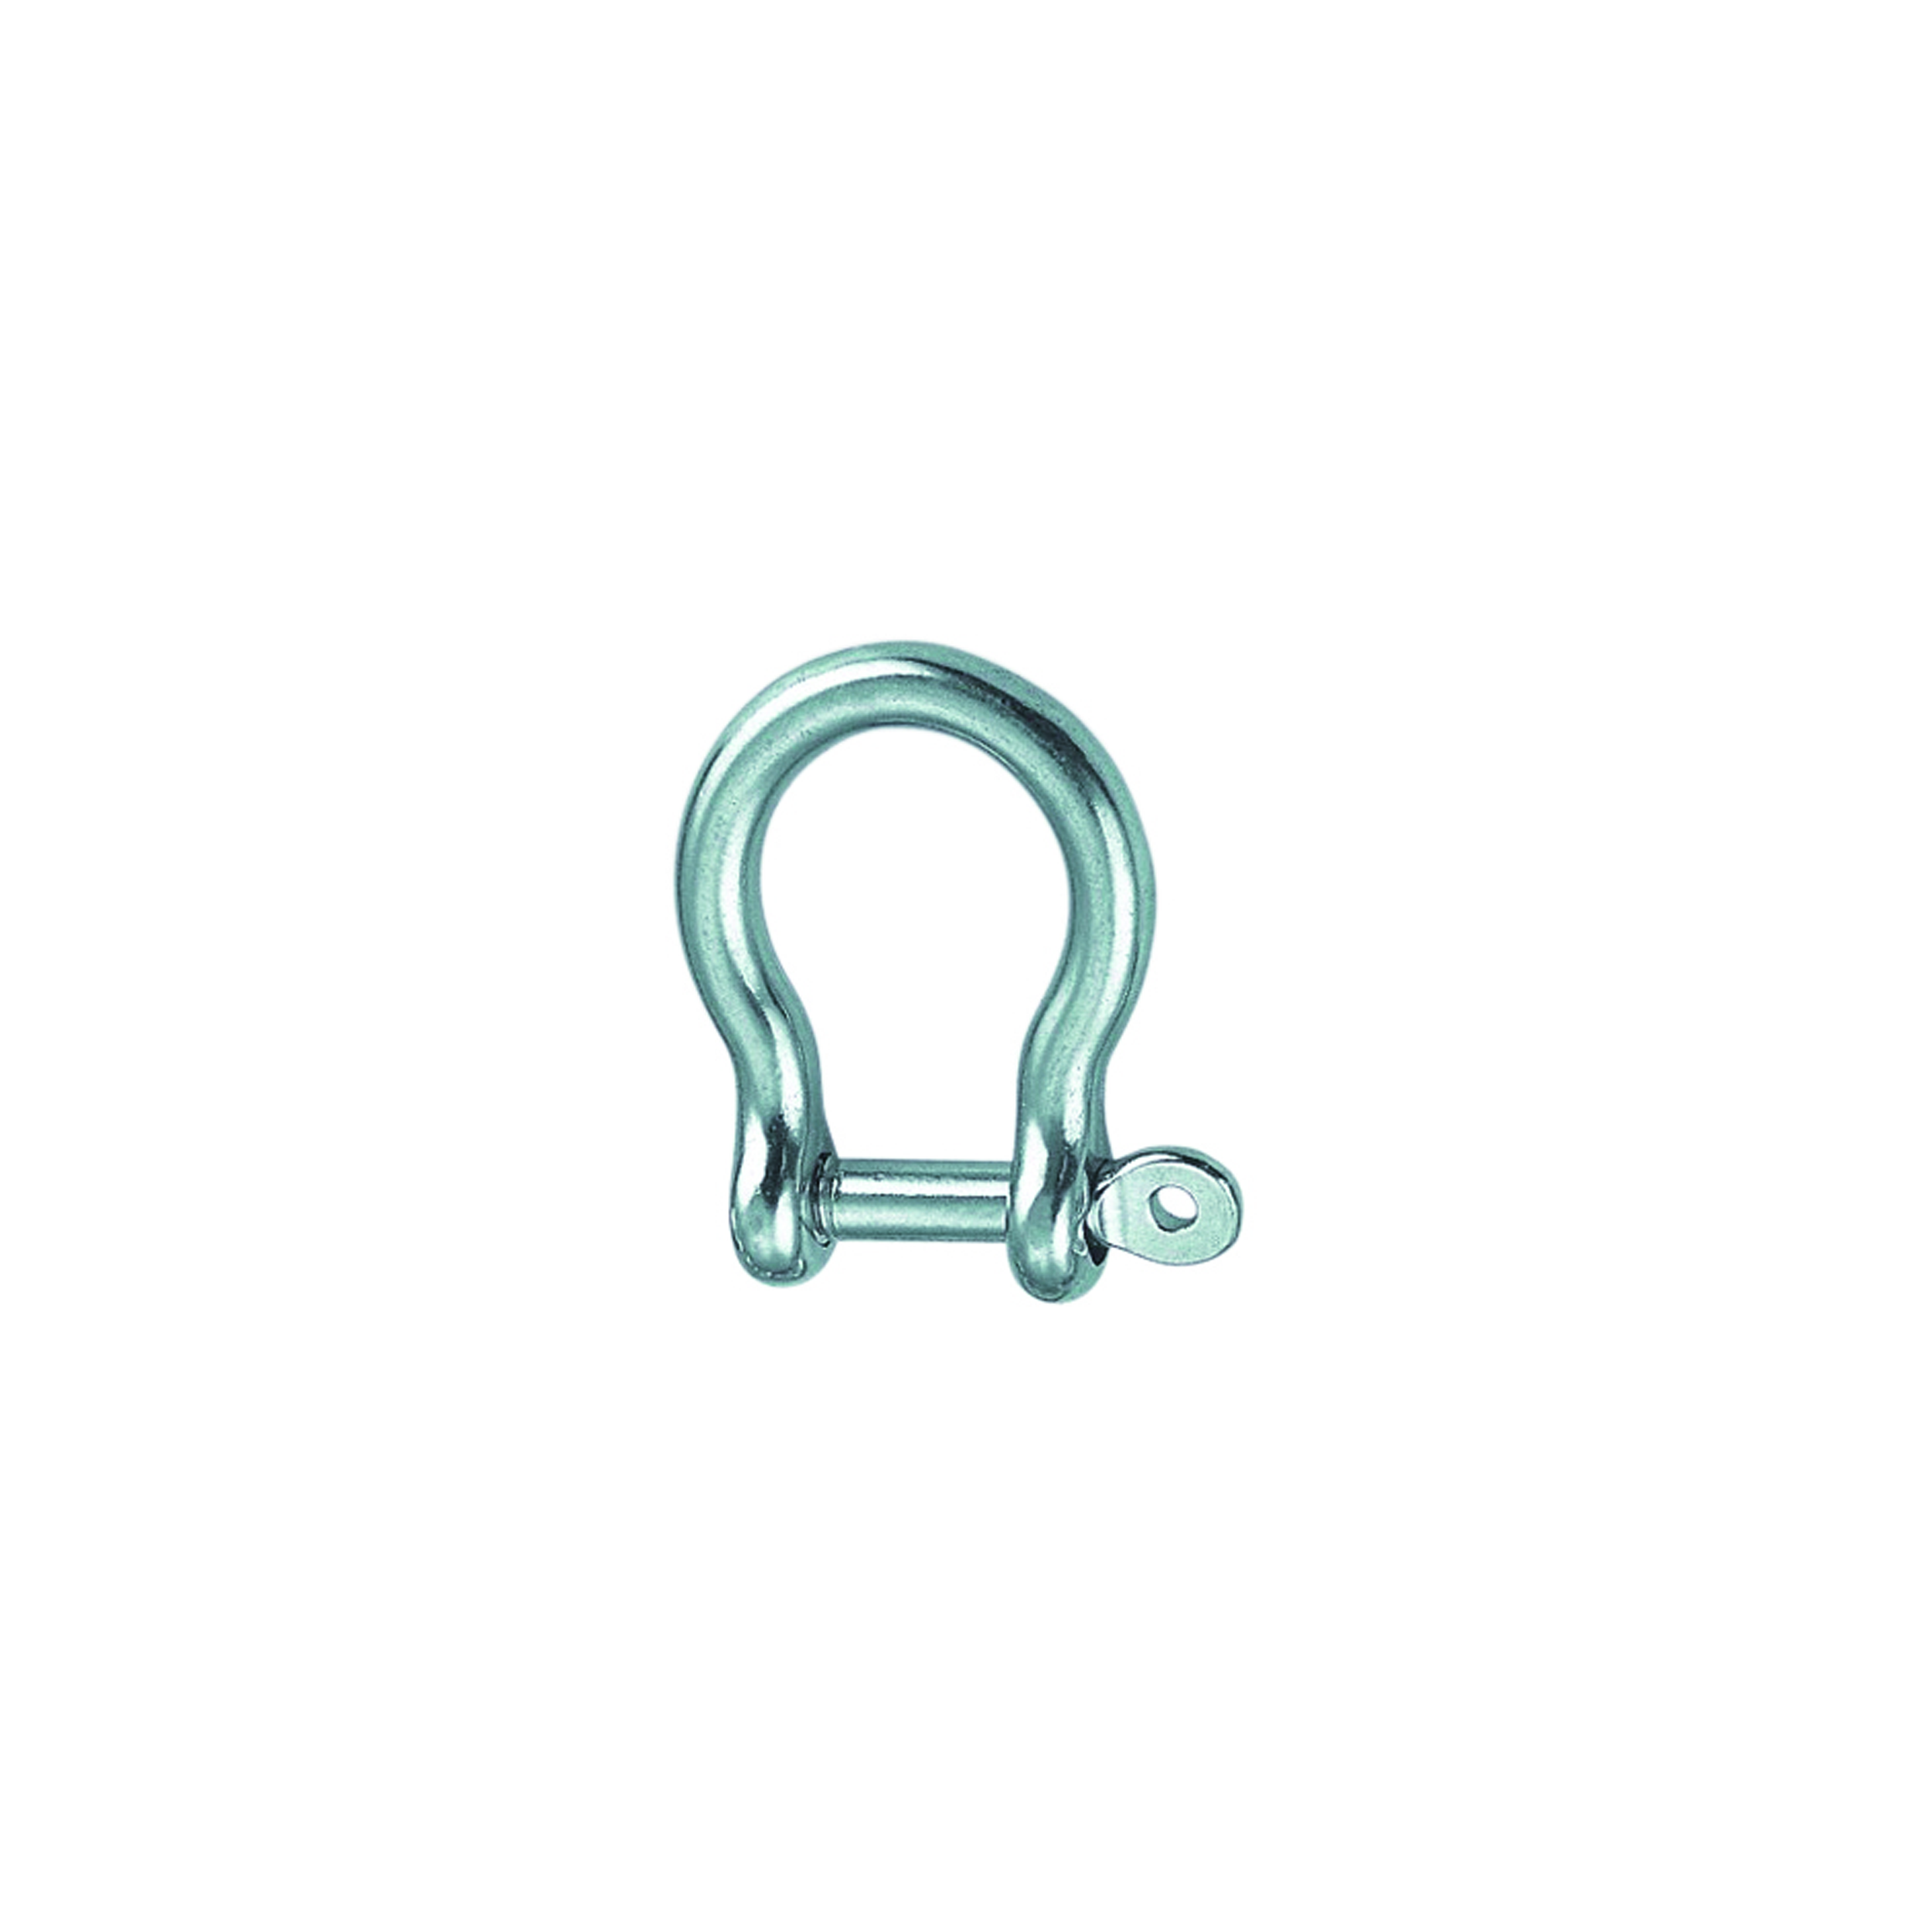 10 STCK / PCS. Bow shackle with captive pin A4  8mm